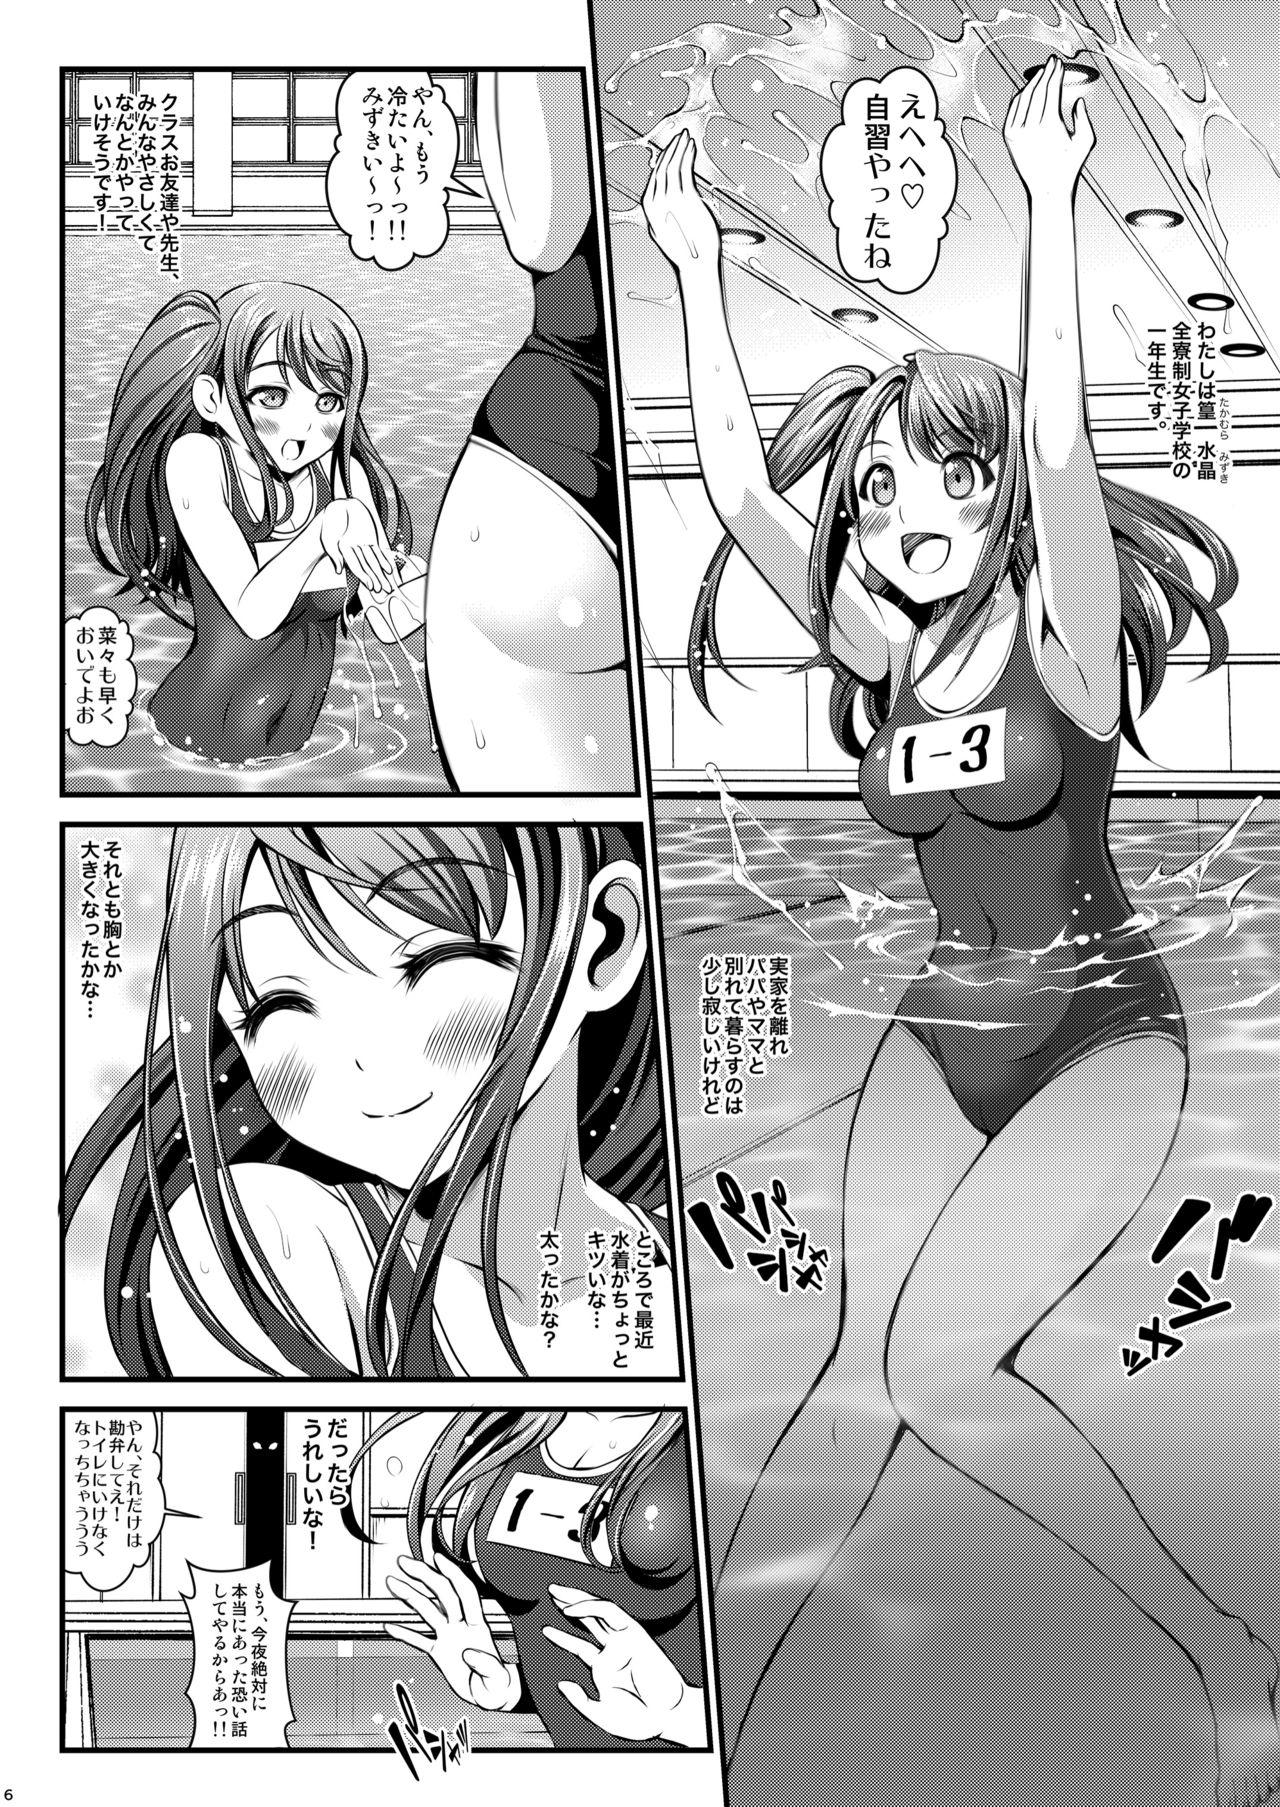 Mistress Youmuin no Ossan - Original Breasts - Page 6